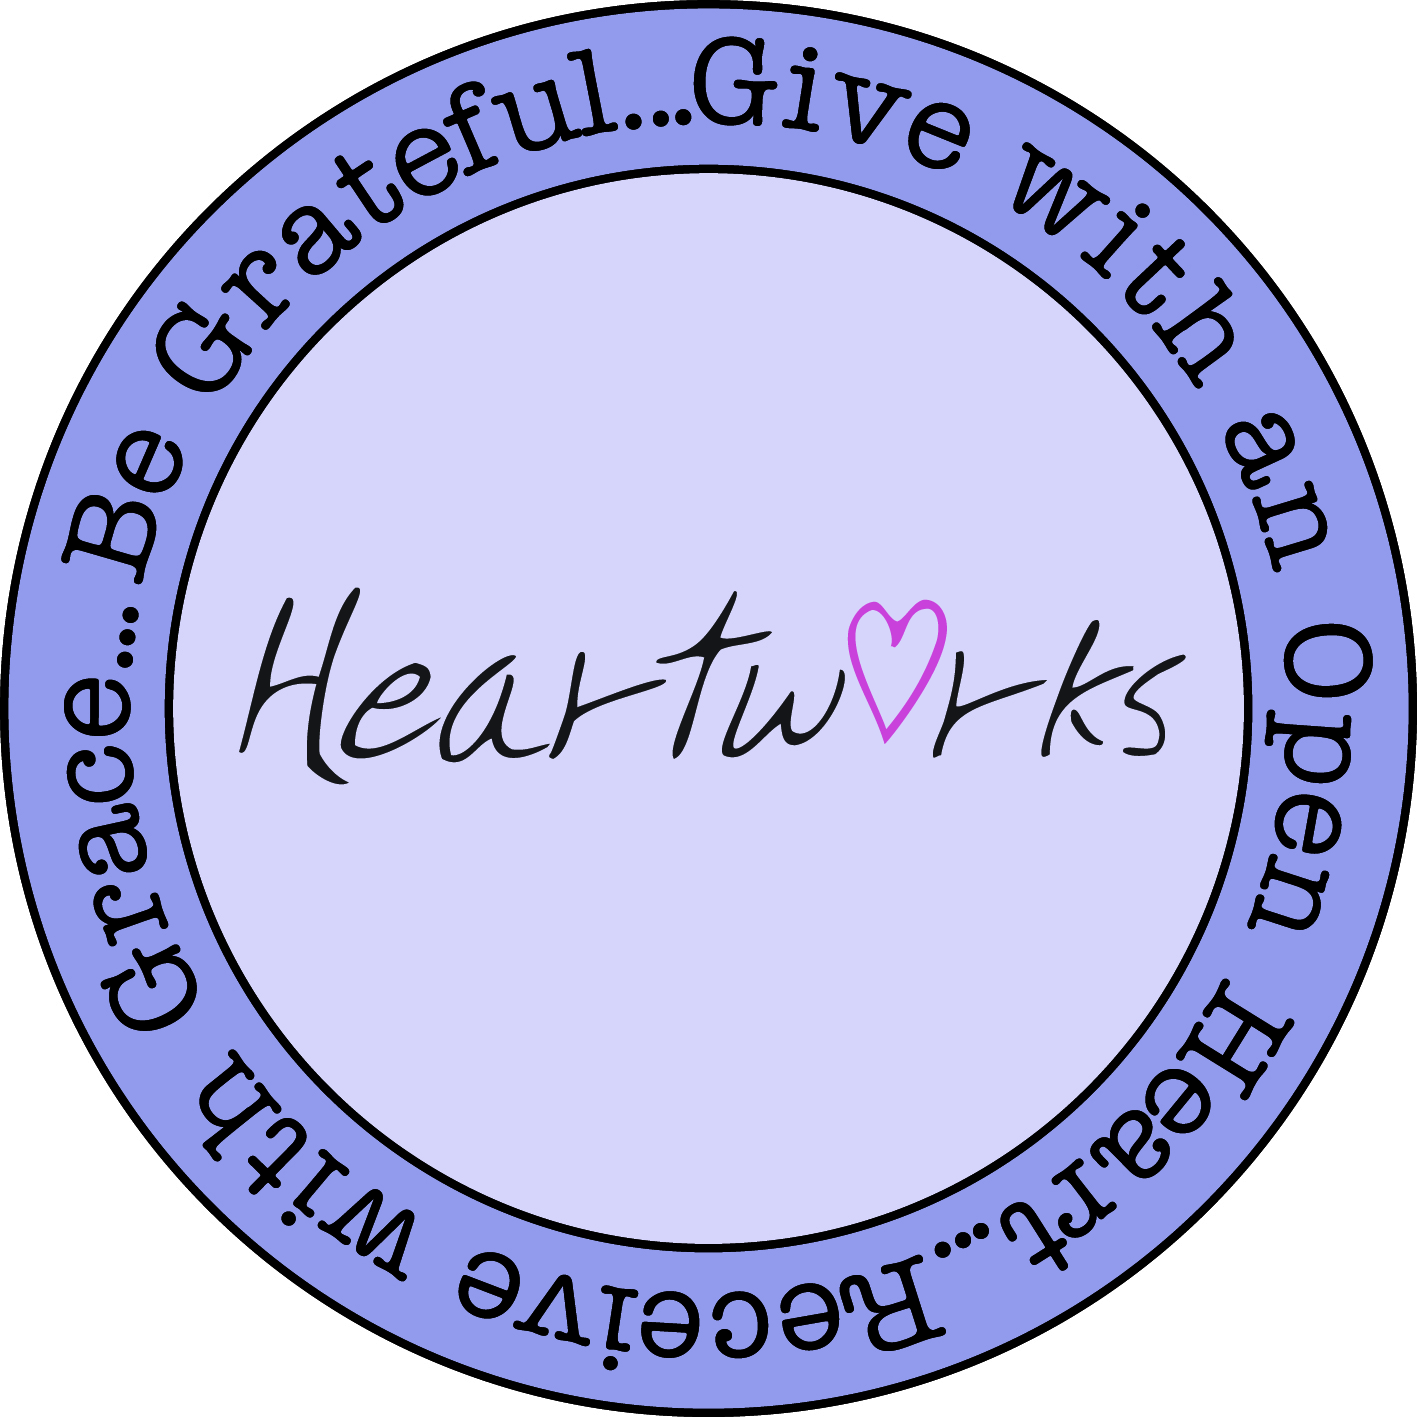 Heartworks is a non-profit organization with the mission of showing kindness and support to those facing illness, loss, or grief.